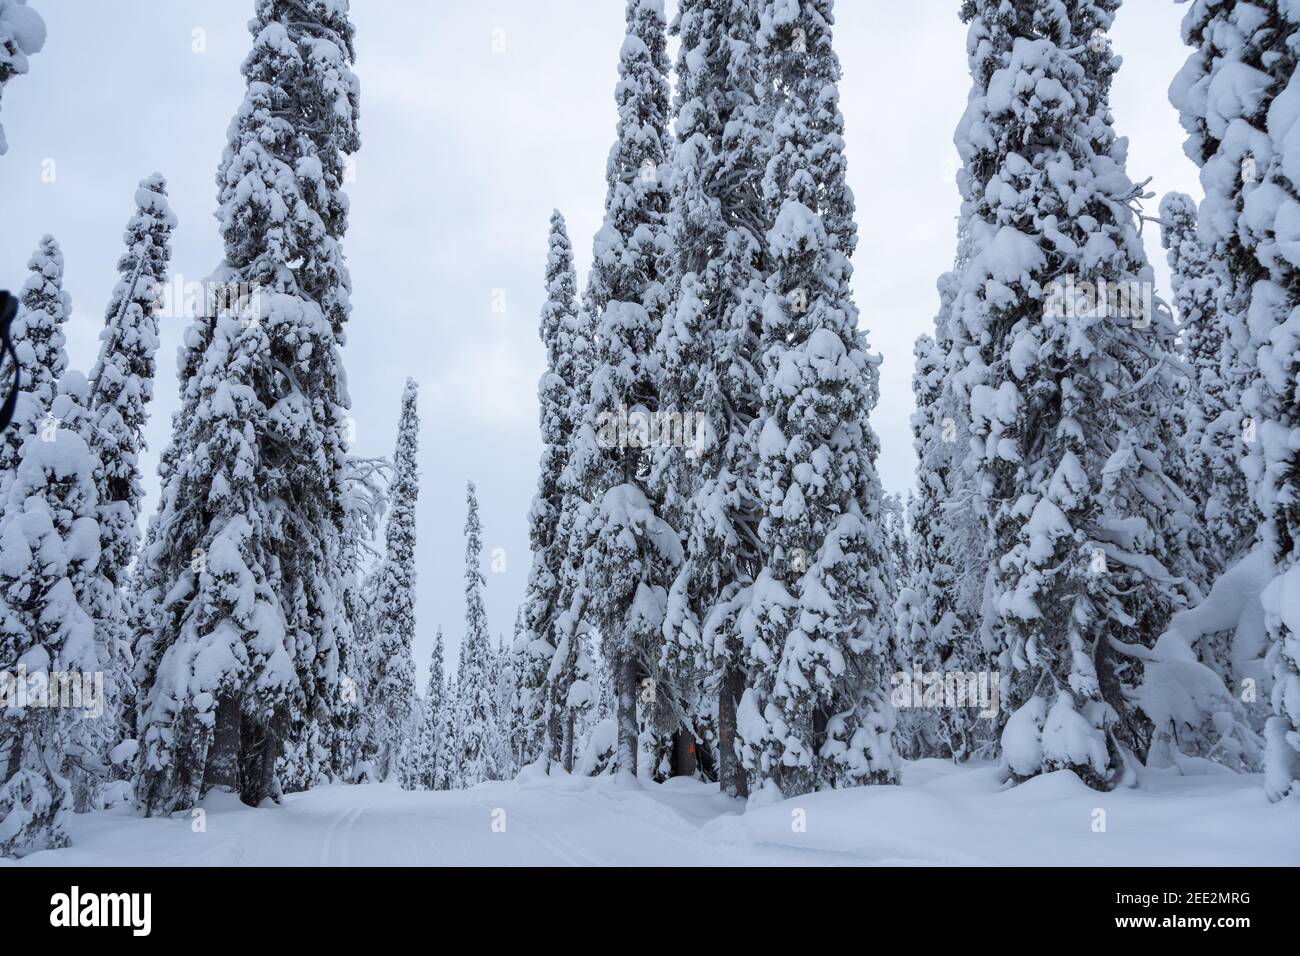 Snowy landscape in Finland's Lapland Stock Photo